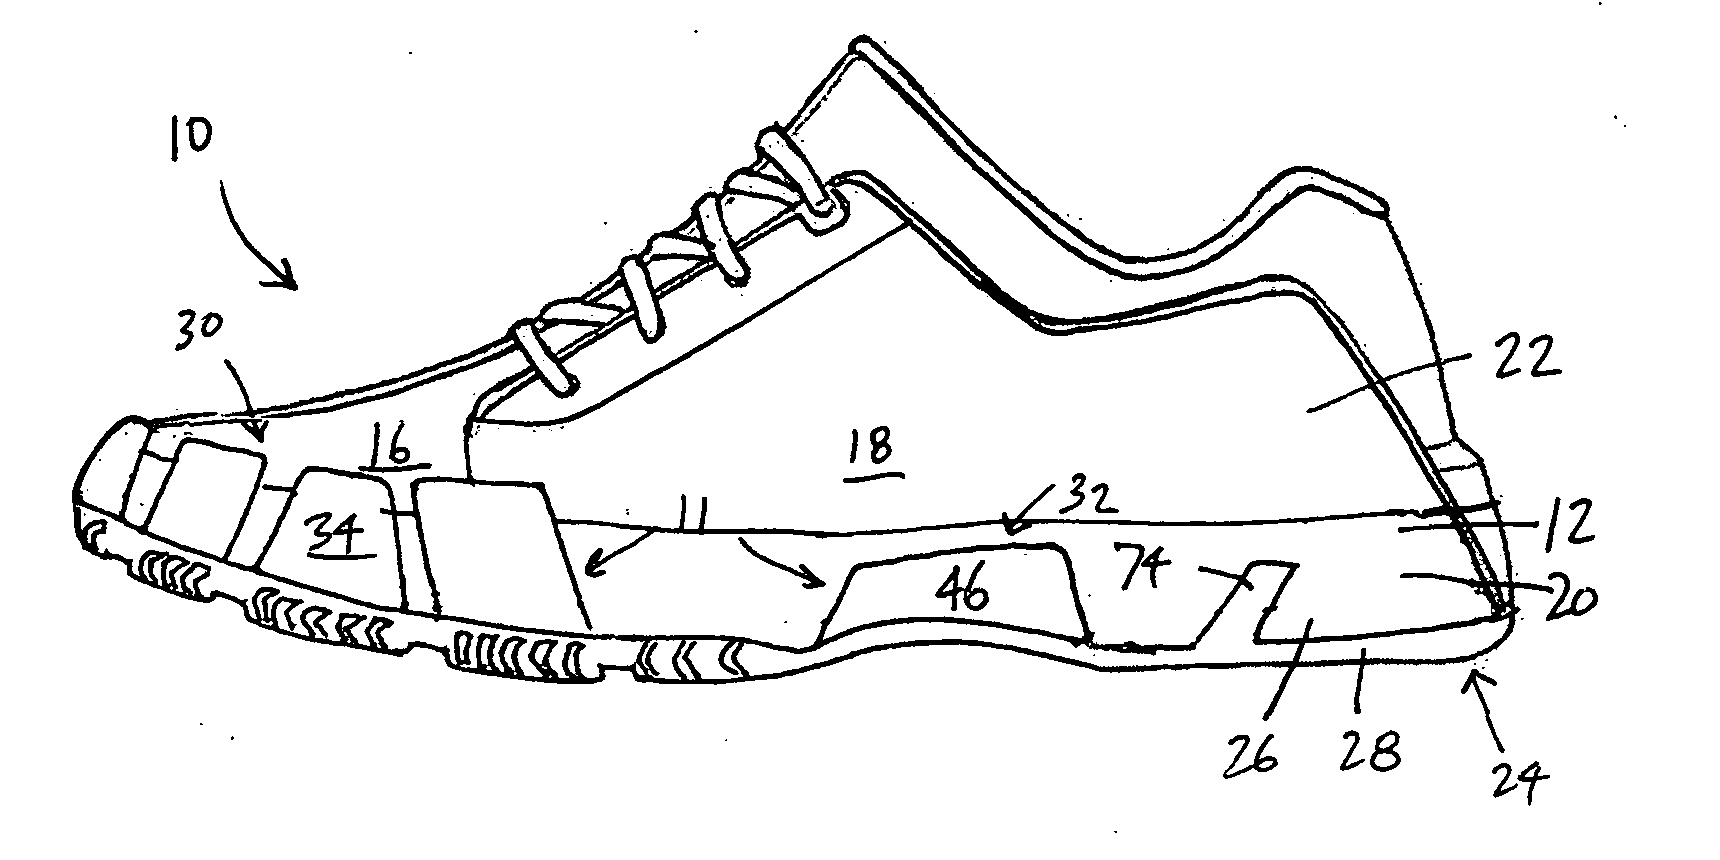 Article of footwear with sole plate